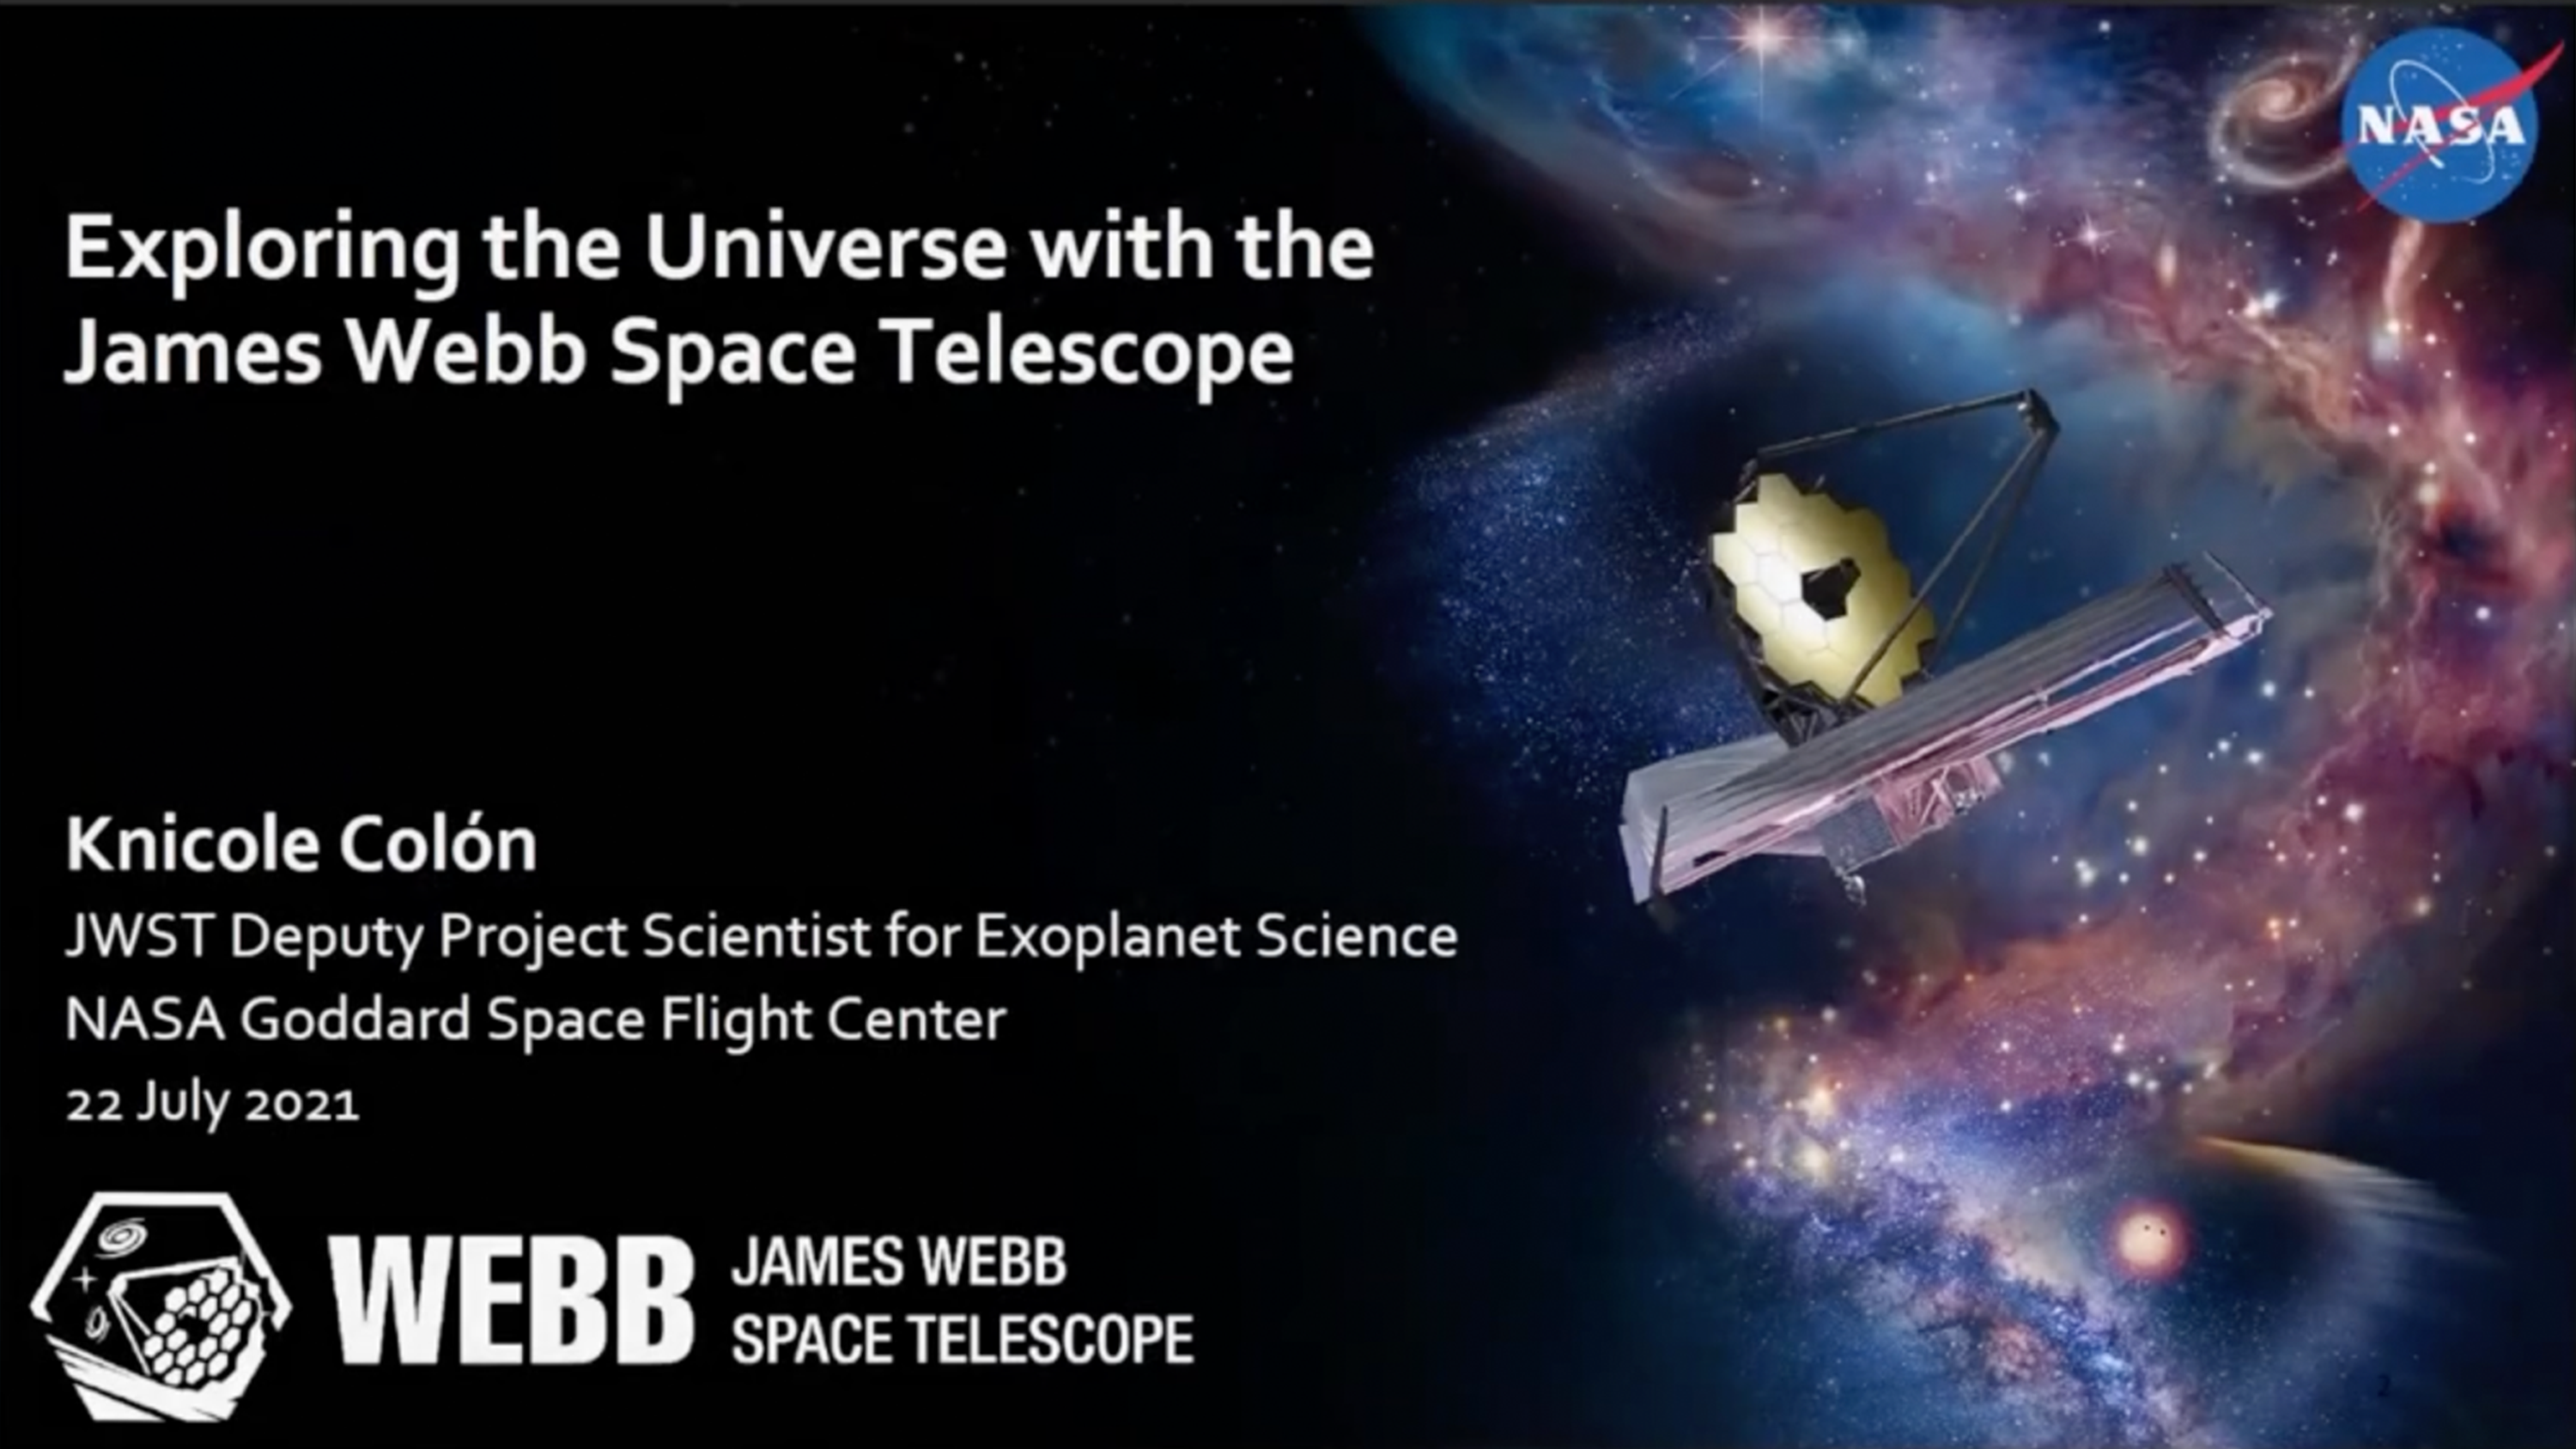 Exploring the Universe with JWST